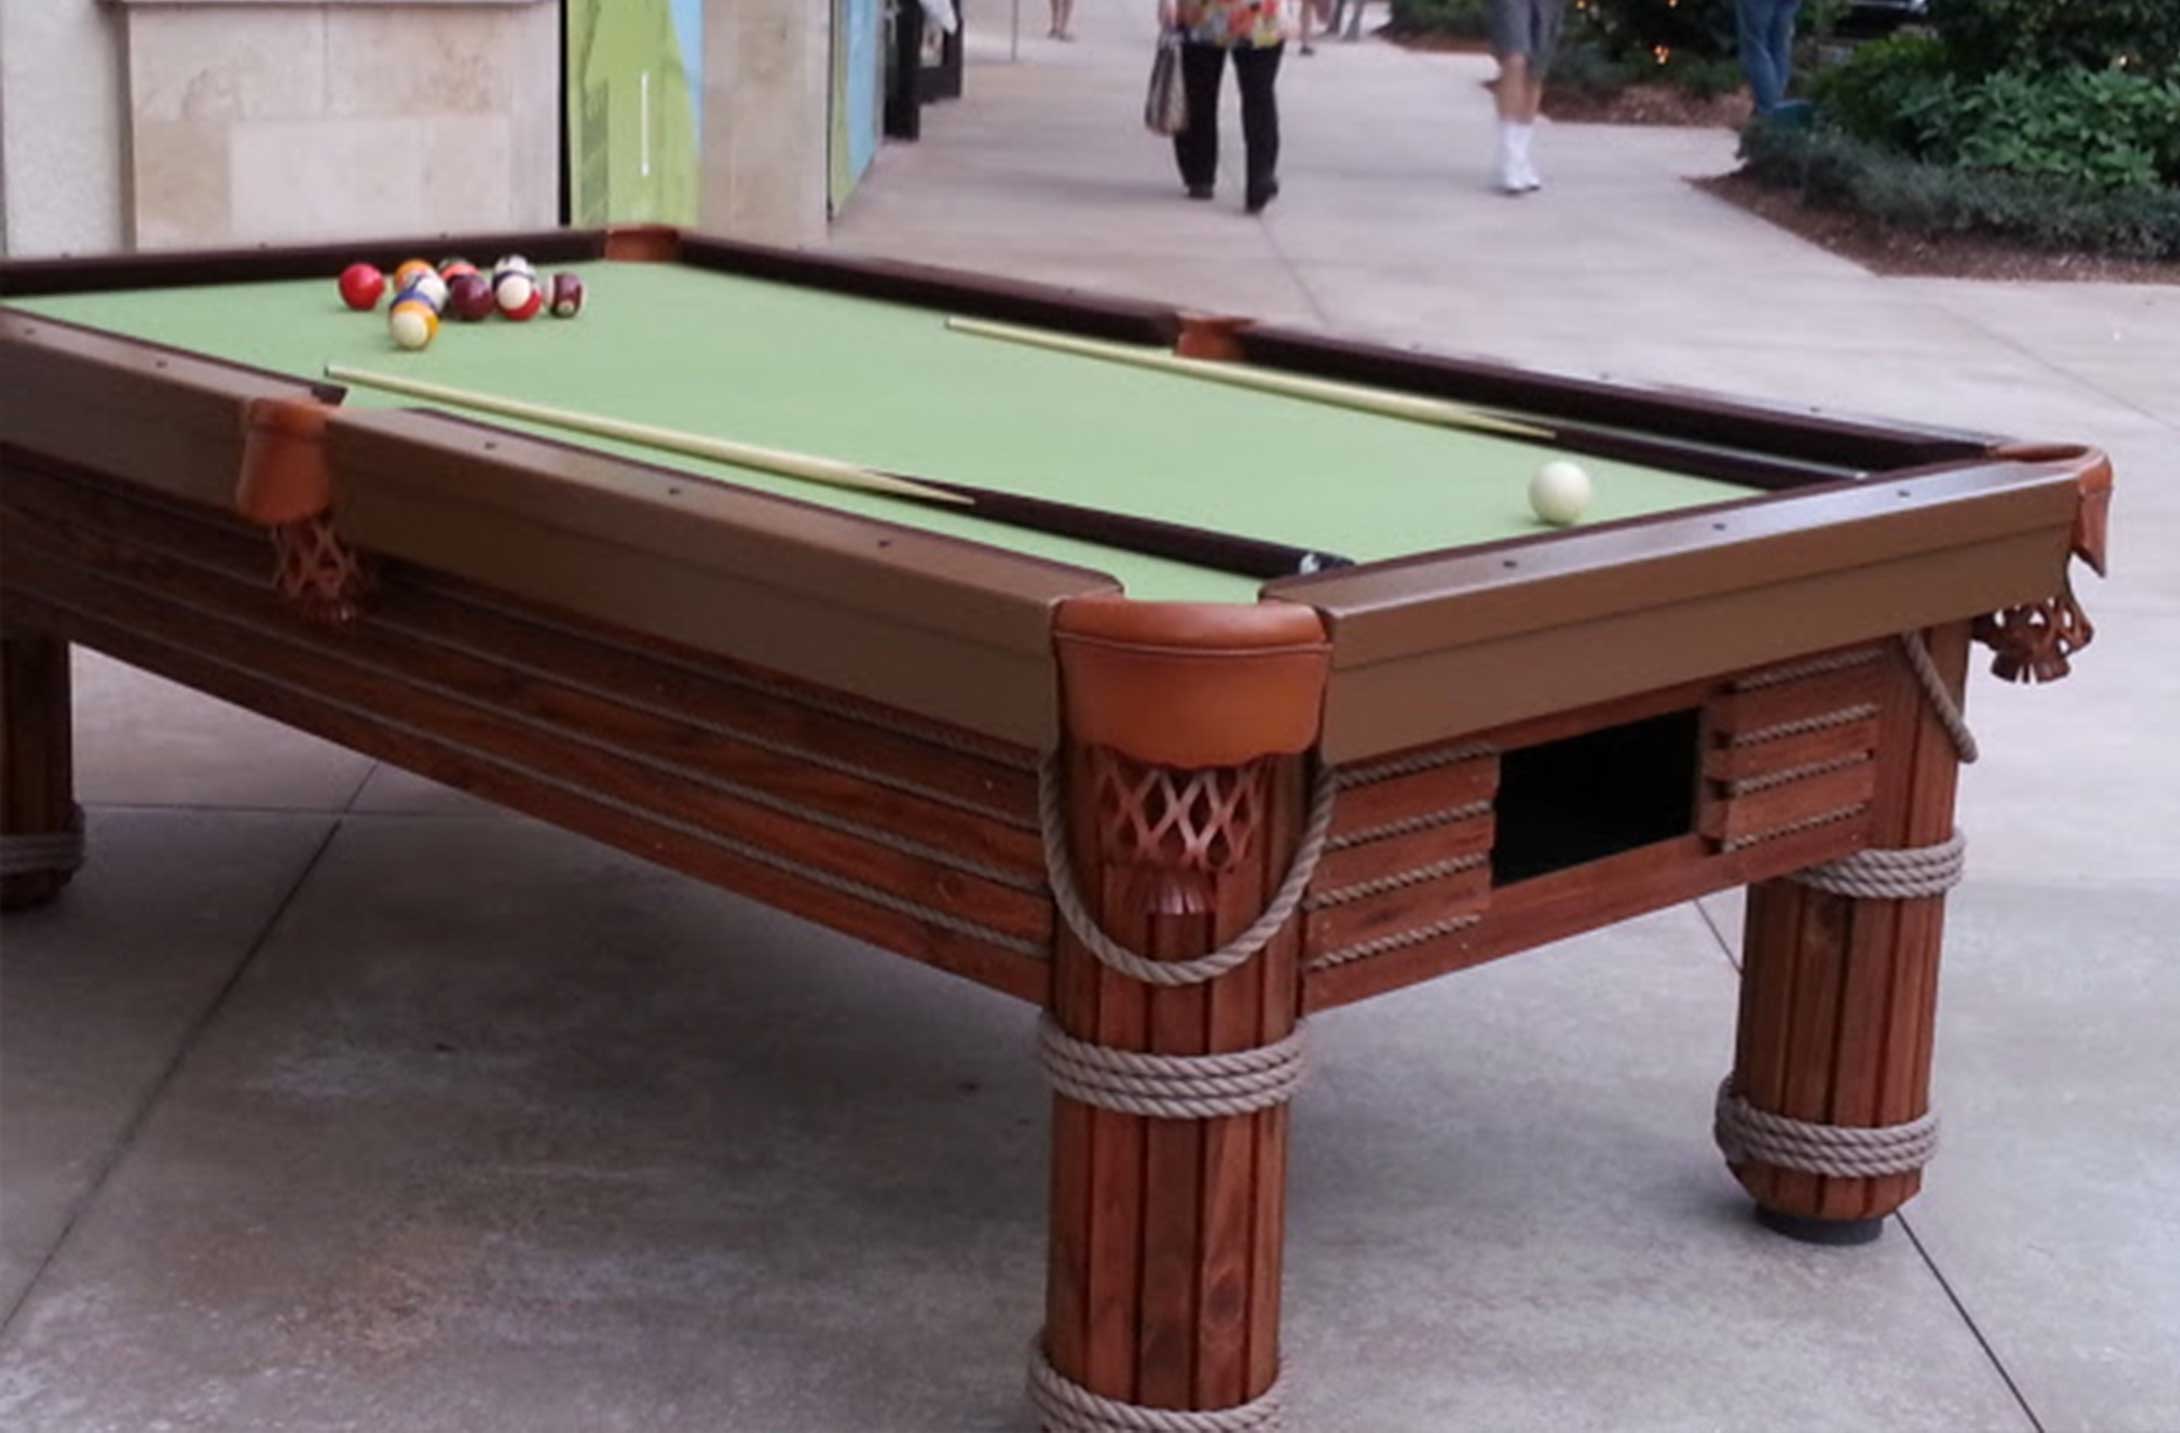 R&R Outdoors All Weather Billiards custom Caribbean pool table in the Mercato Naples, Florida